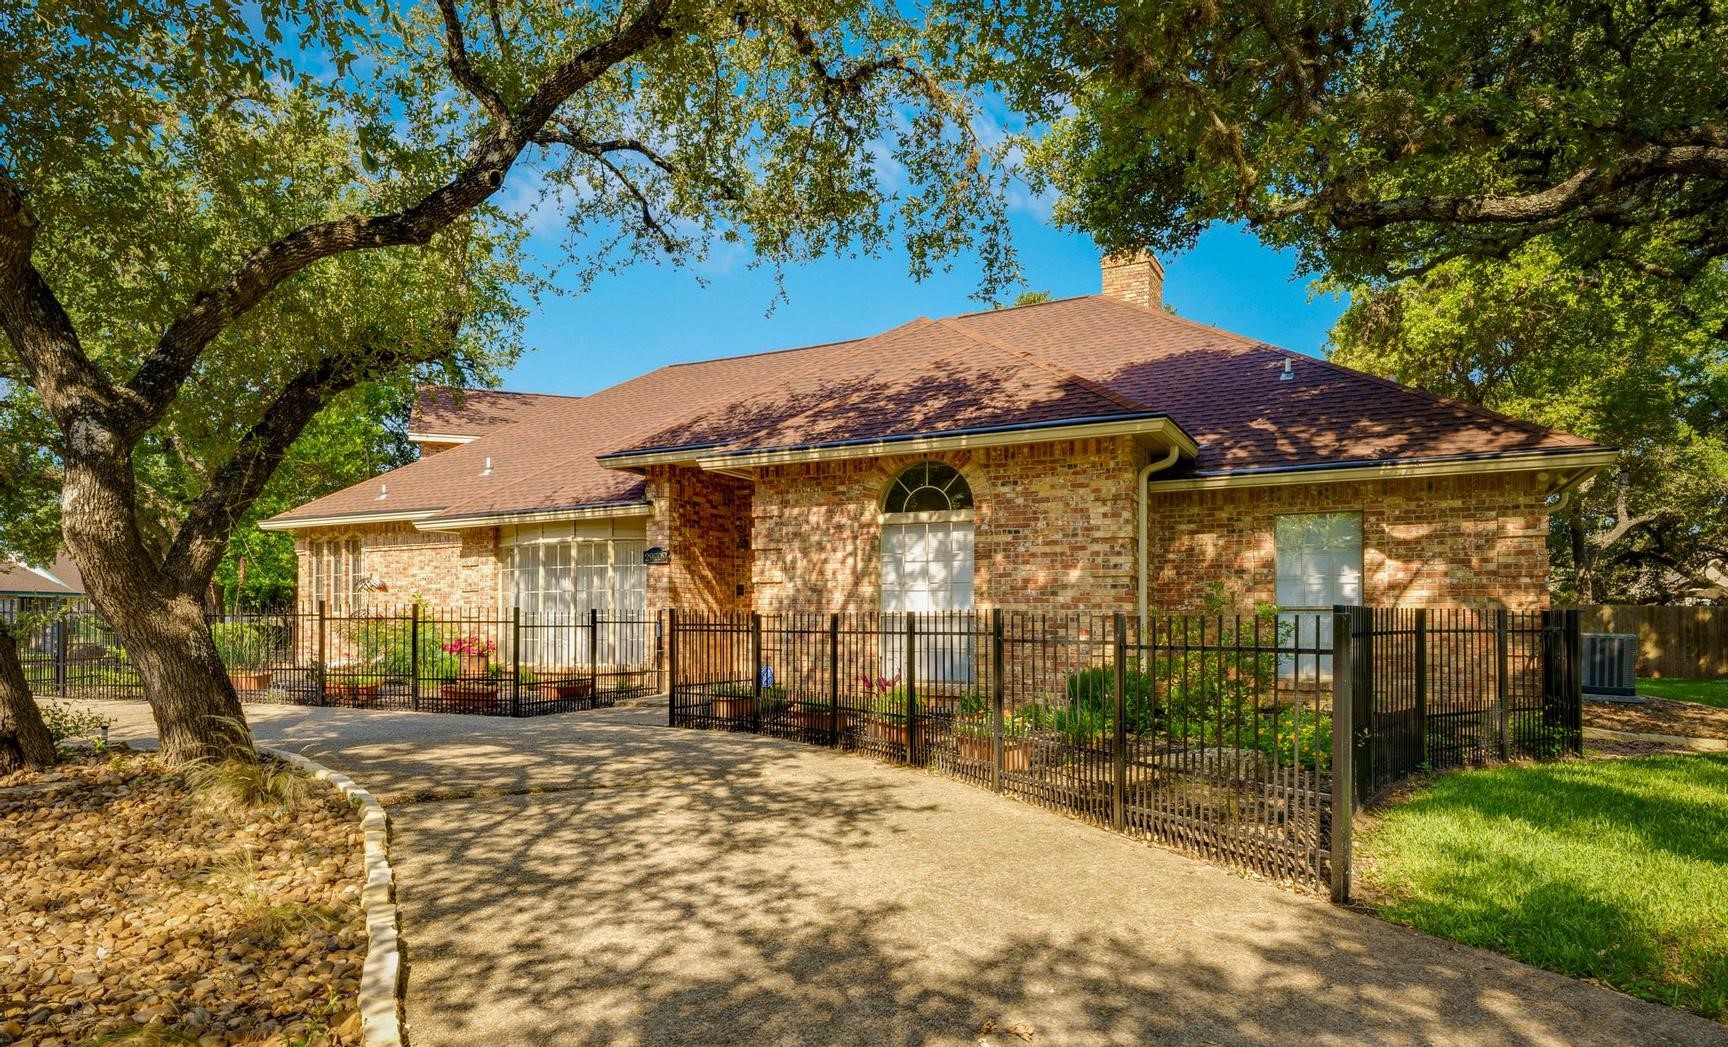 beautiful home for sale in Boerne tx on cul-de-sac - Boerne, tx real estate